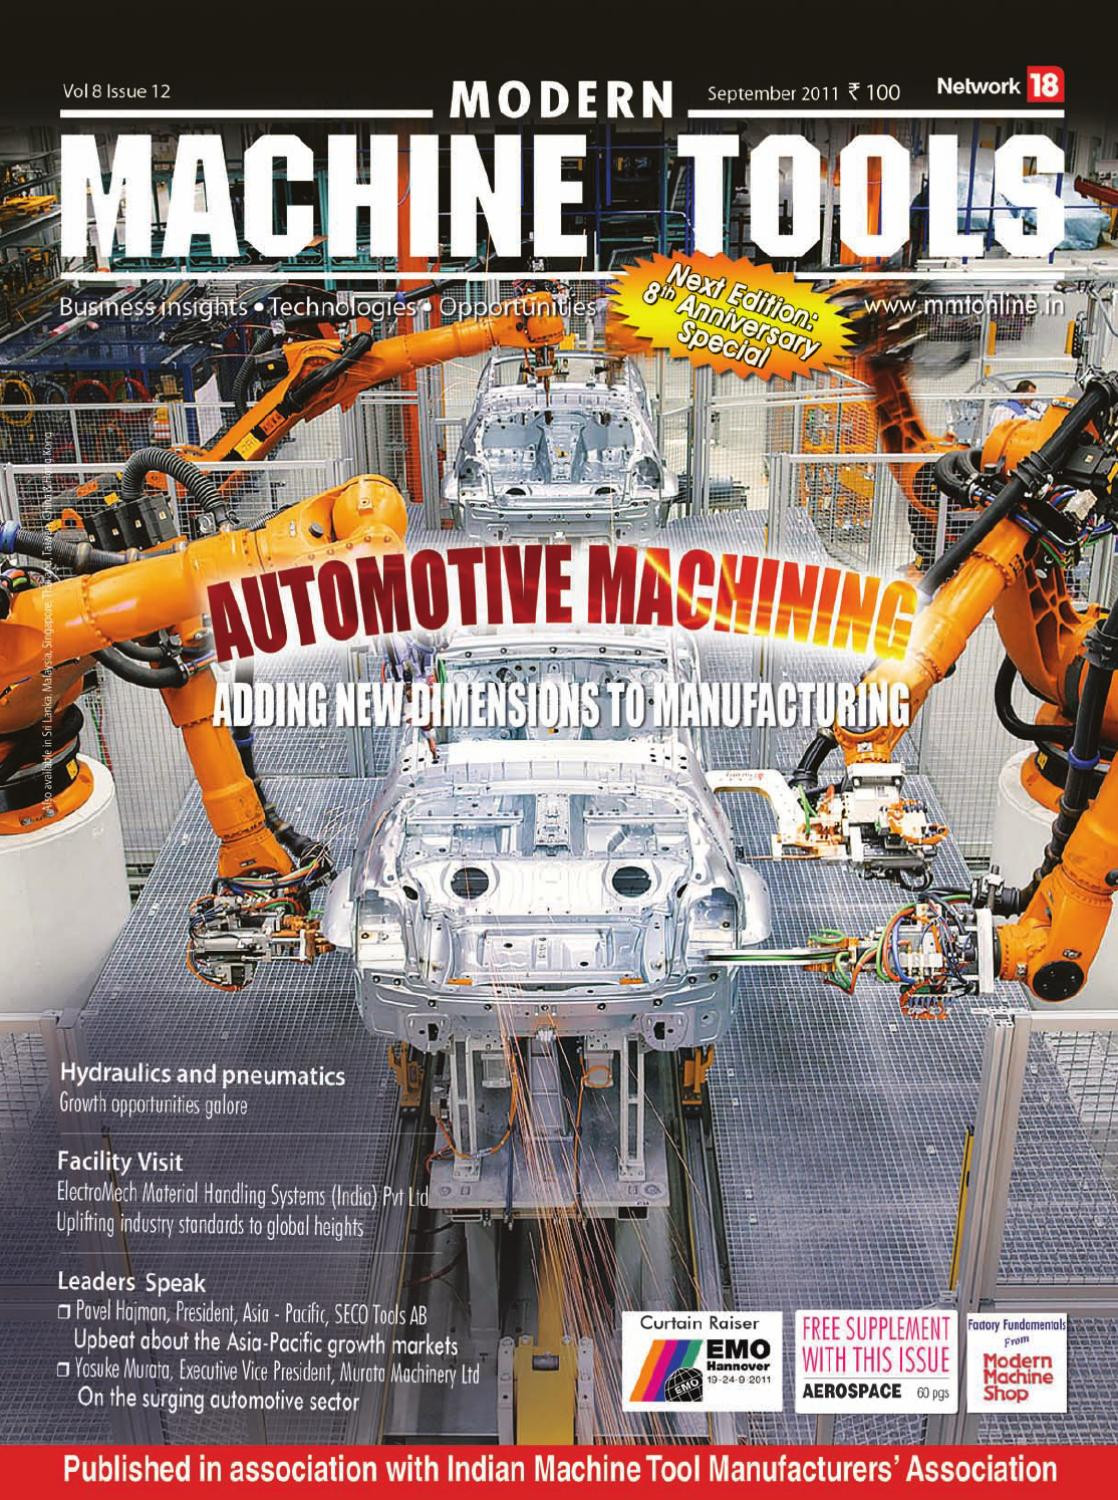 Received Numeros Adcoles Sample for Resume Modern Machine tools – September 2011 by Infomedia18 – issuu